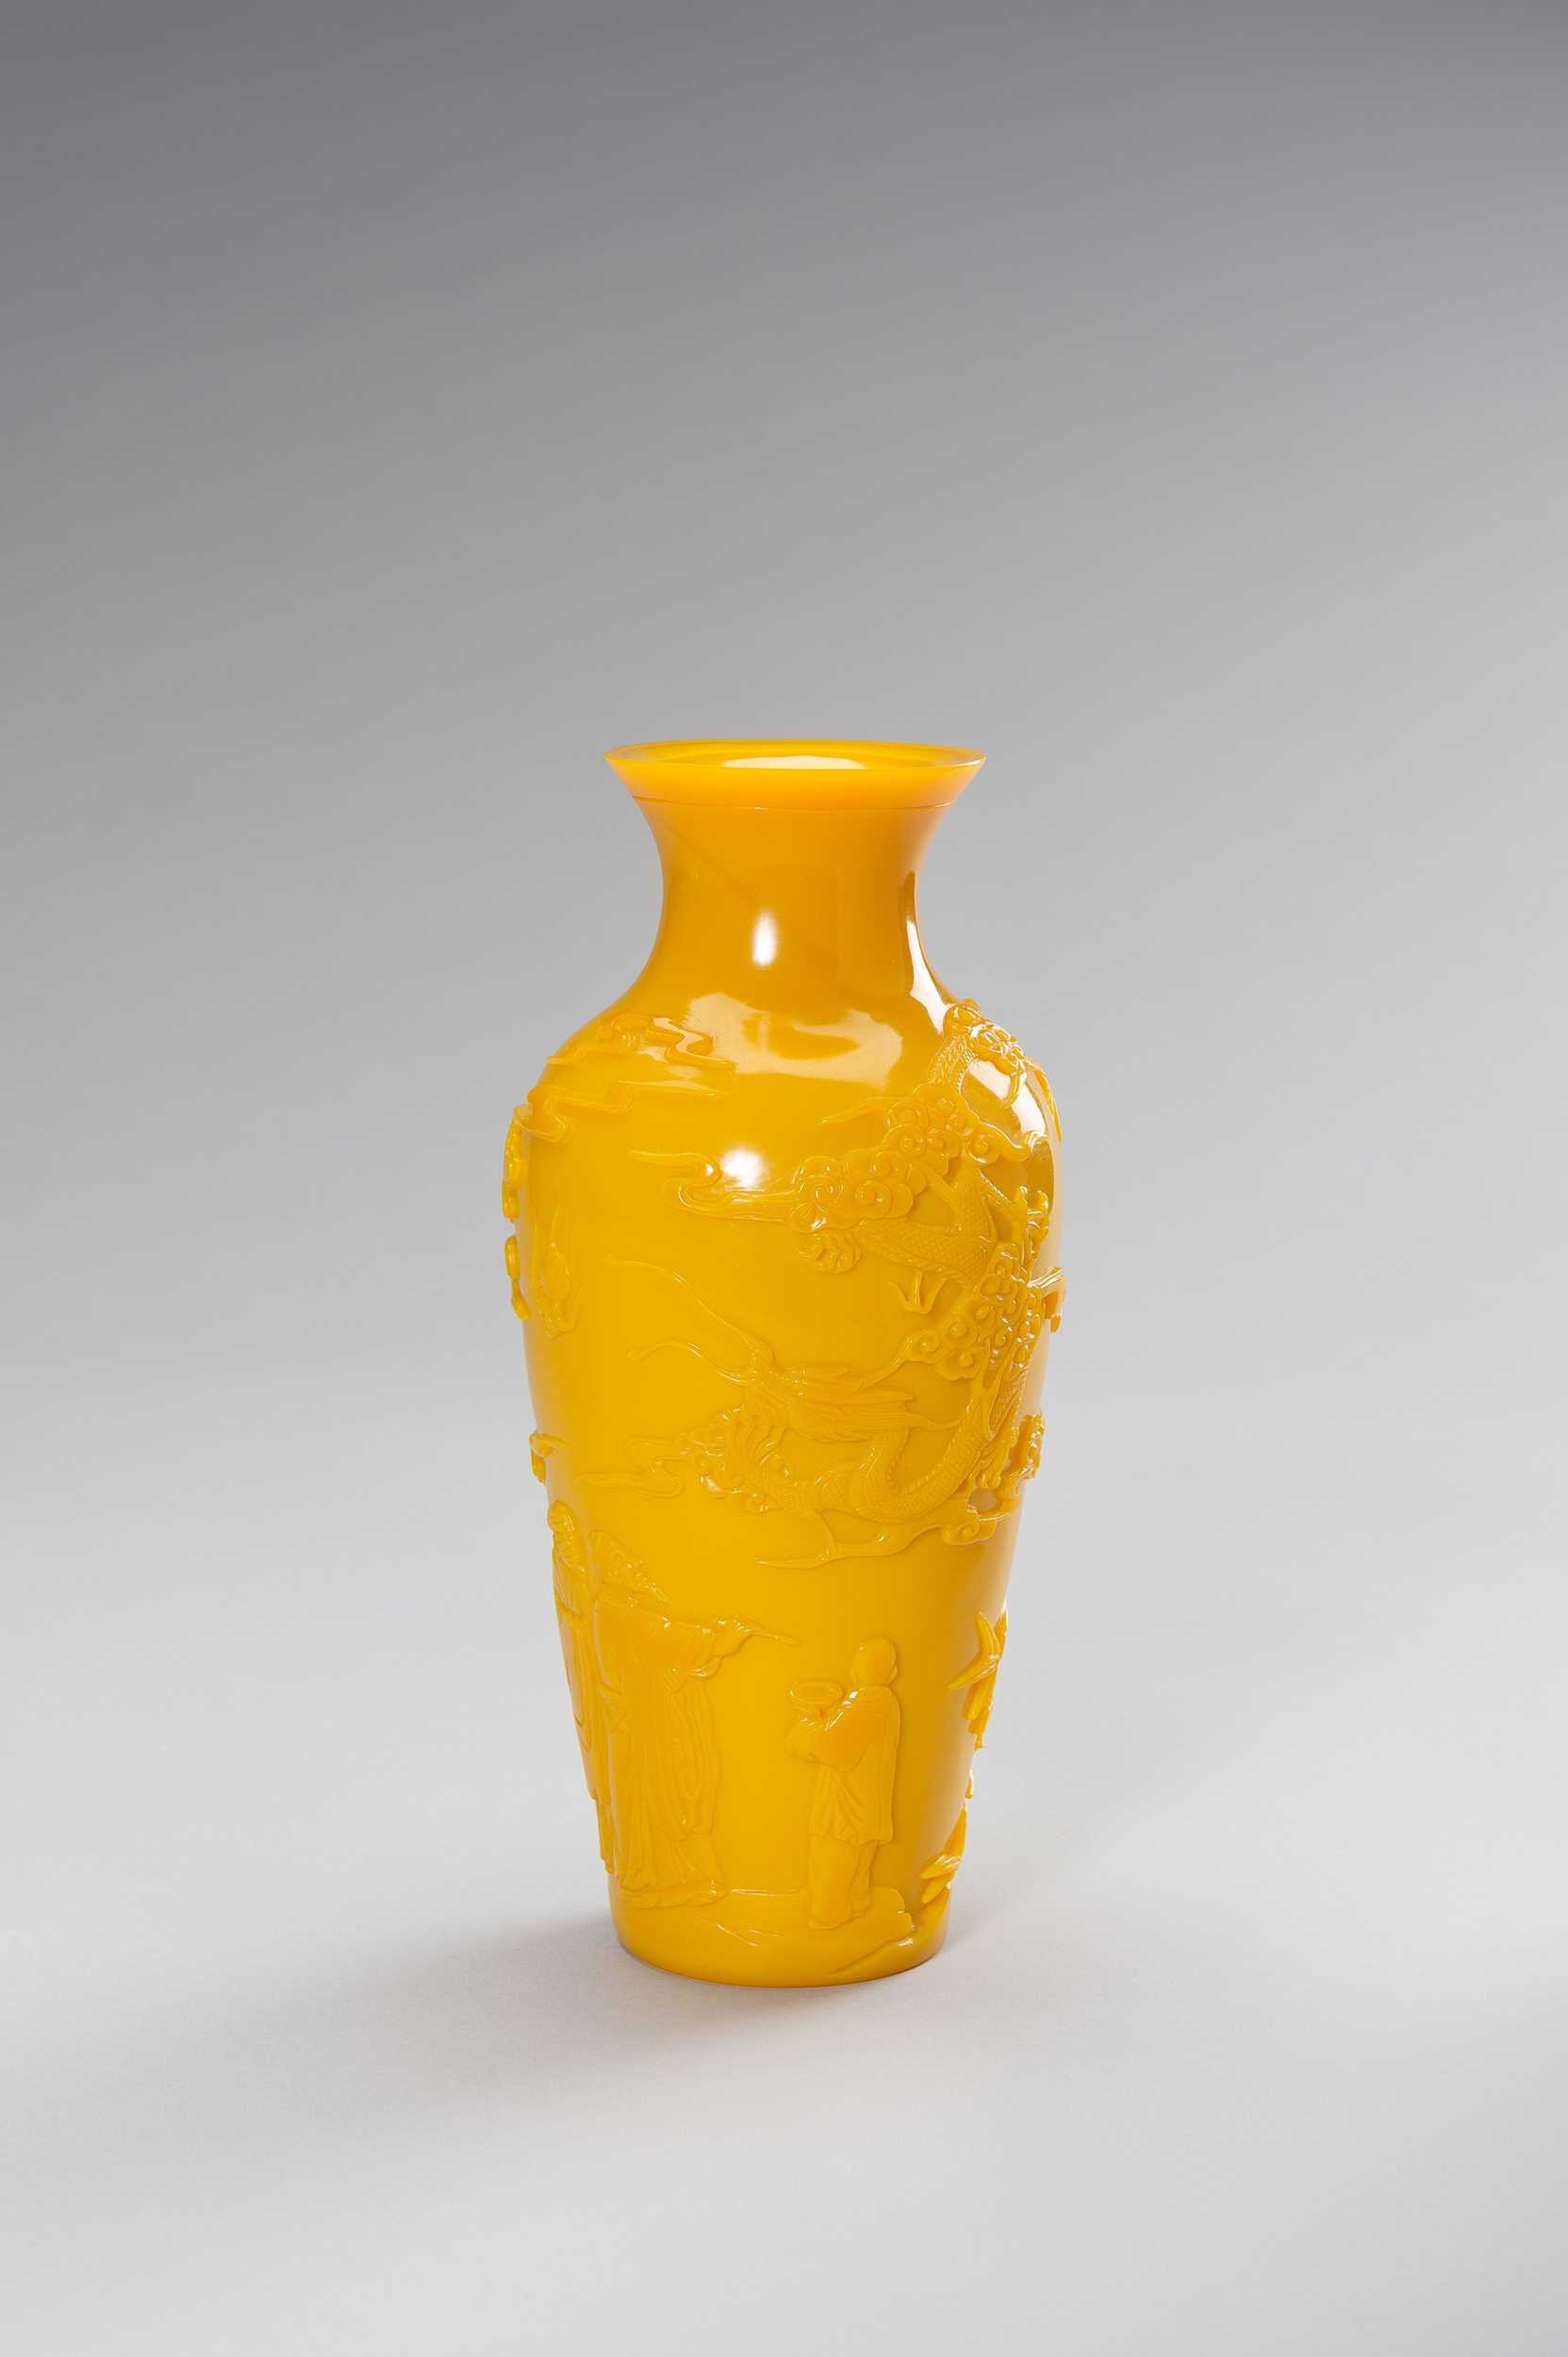 Lot 134 - A DECORATIVE ‘IMPERIAL YELLOW’ BEIJING GLASS VASE